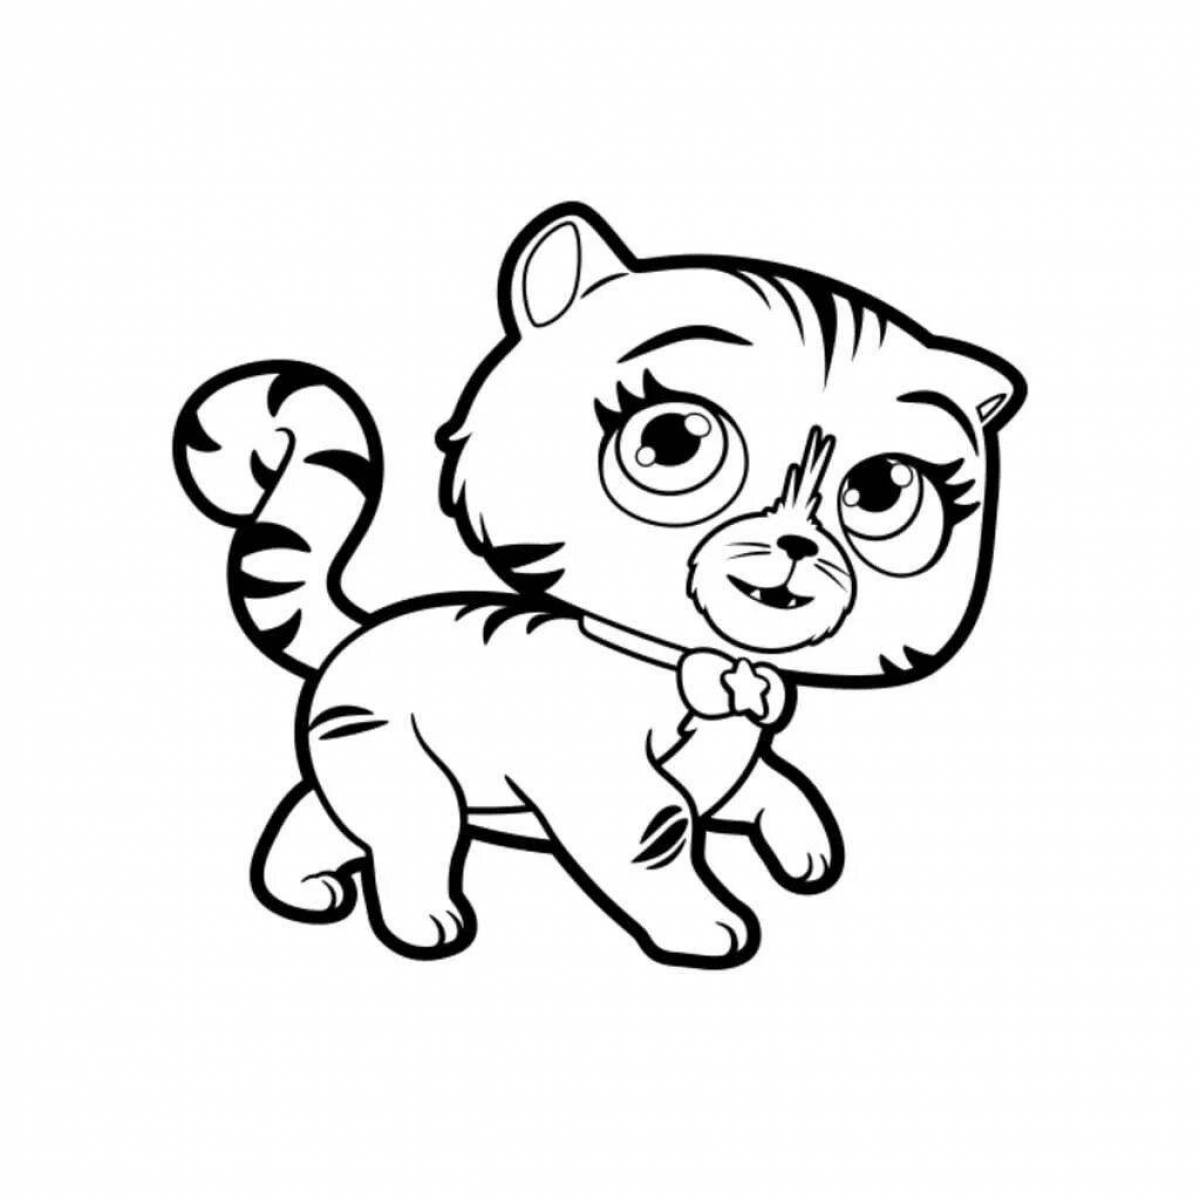 Curious little cat coloring page